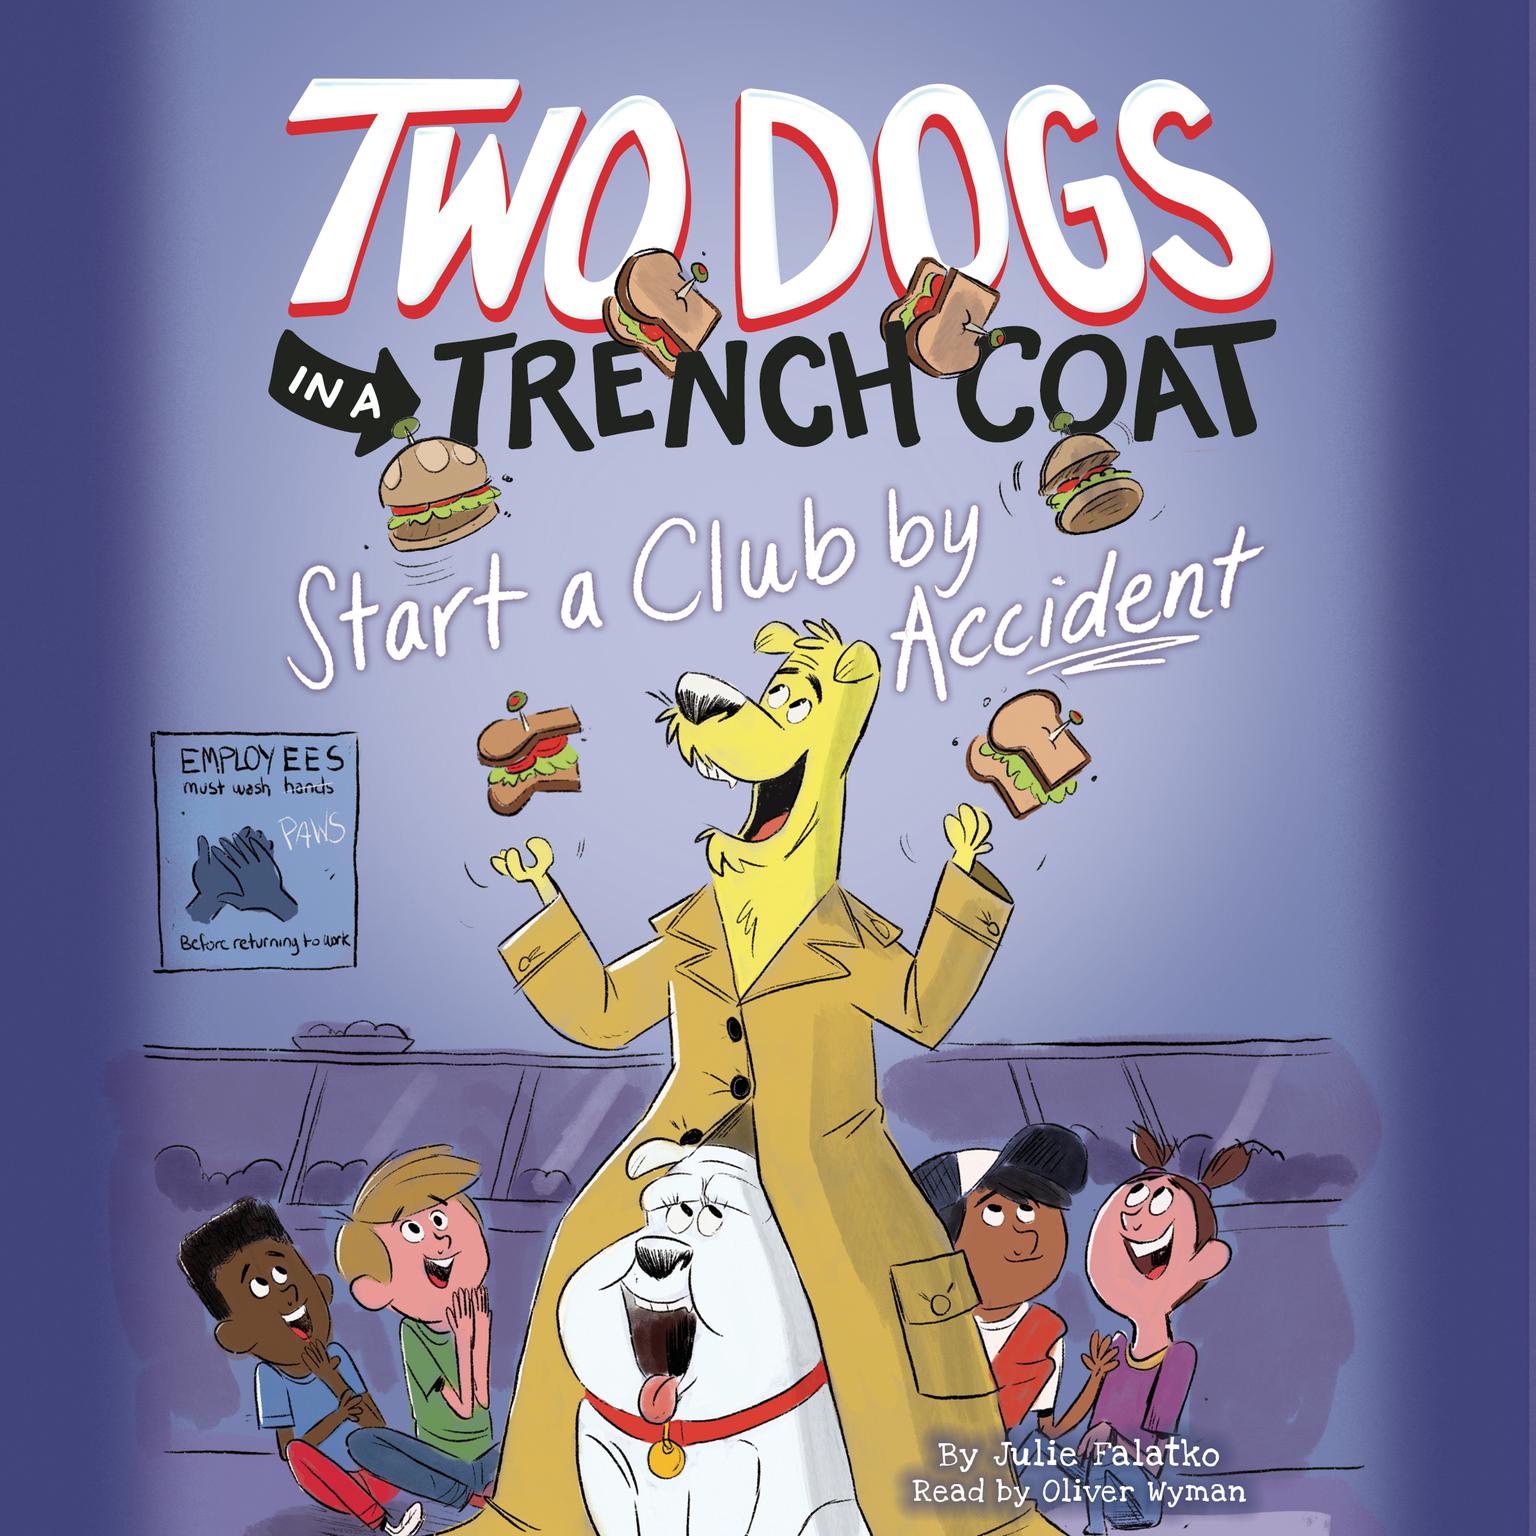 Two Dogs in a Trench Coat Start a Club by Accident (Two Dogs in a Trench Coat #2) Audiobook, by Julie Falatko